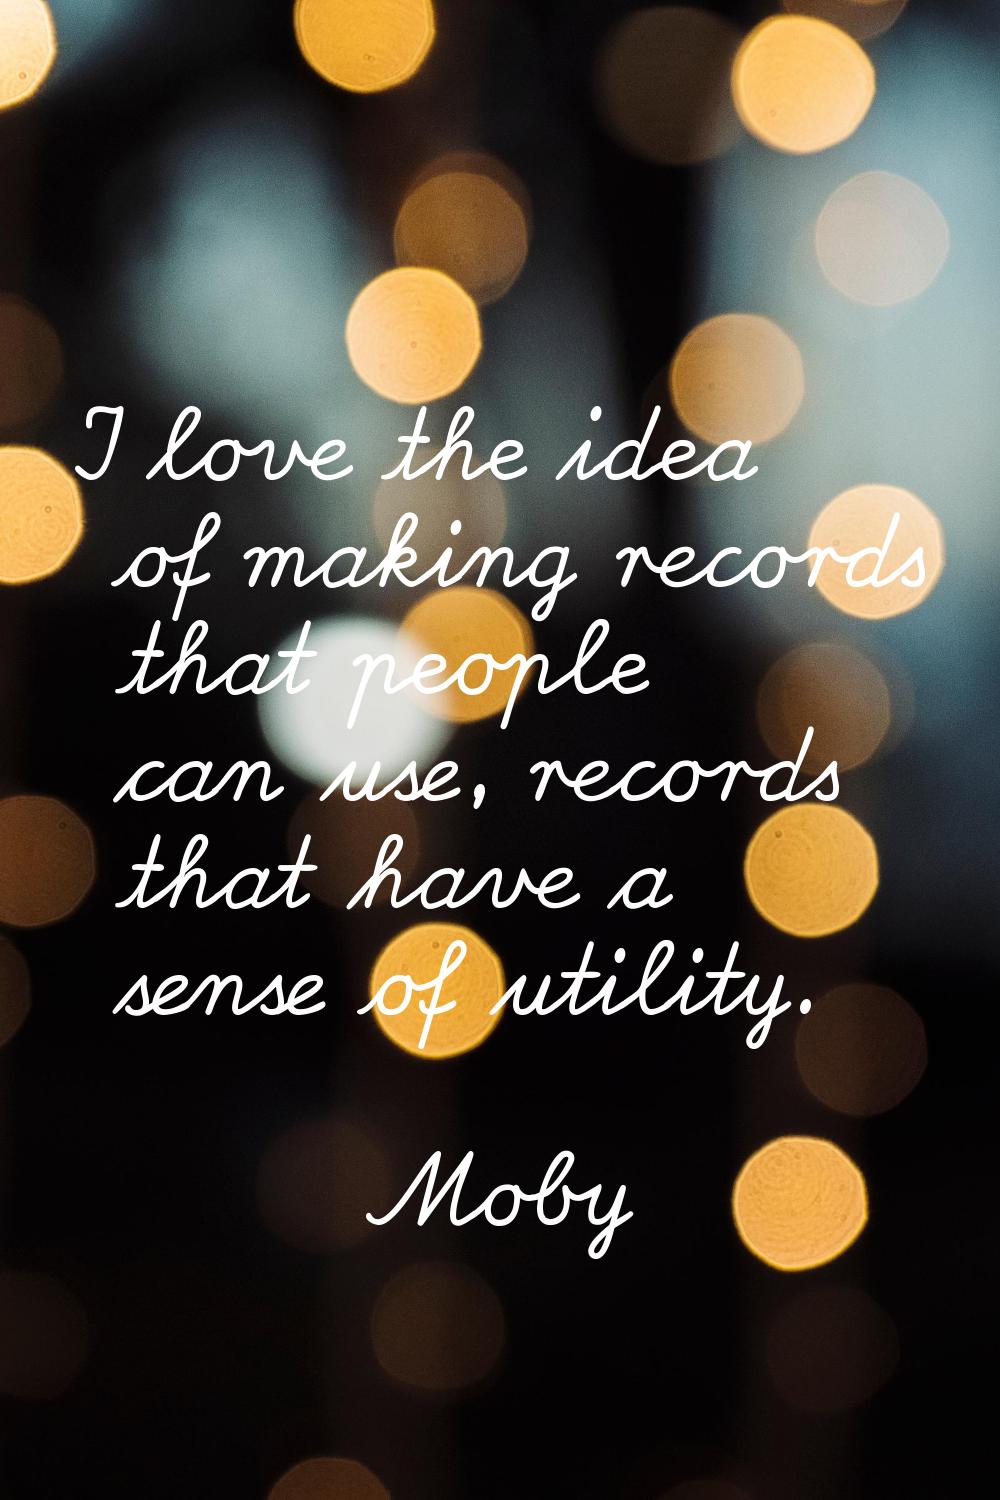 I love the idea of making records that people can use, records that have a sense of utility.